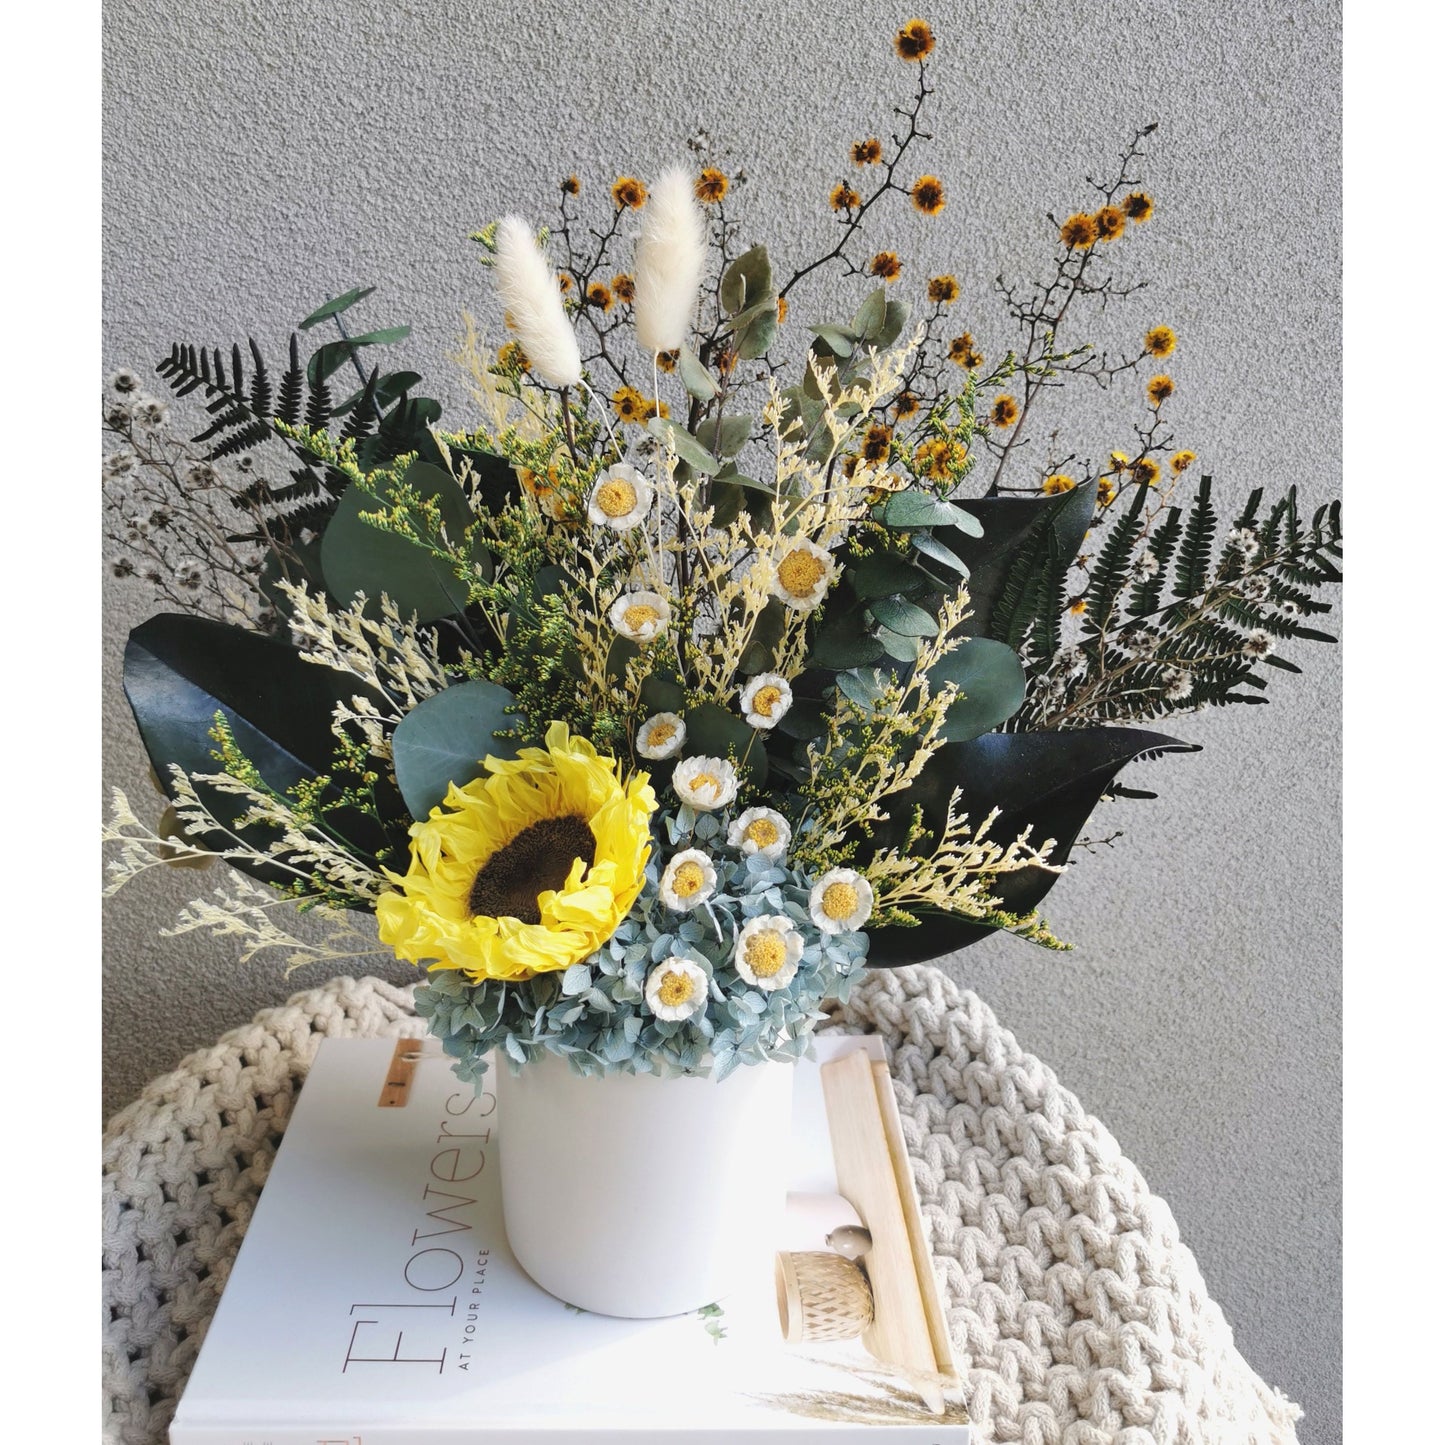 Dried & Preserved flower arrangement featuring a preserved yellow sunflower and yellow daisies and lush greenery and set in to a white pot. Photo shows arrangement sitting on a book against a blank wall